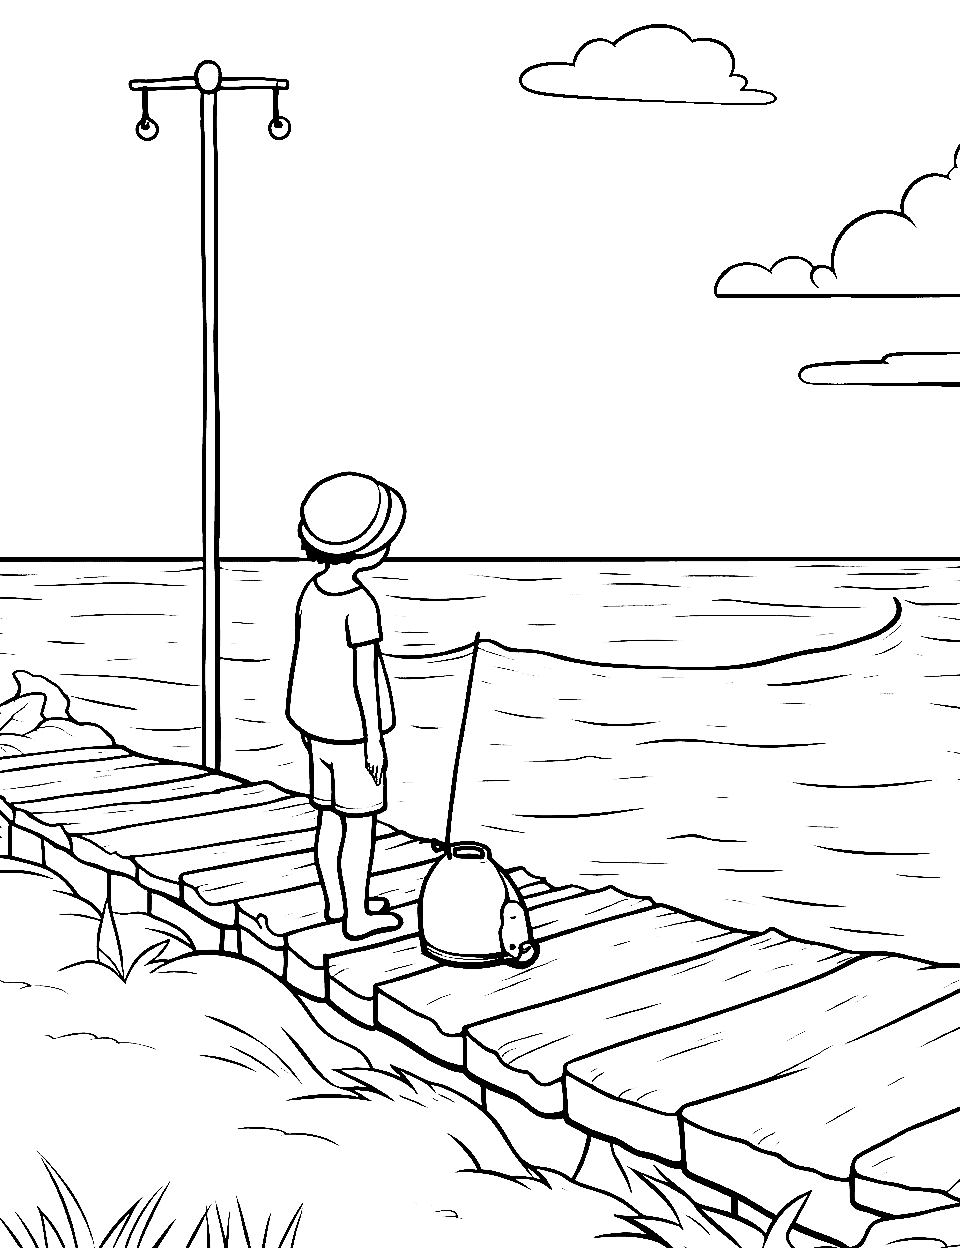 Fishing on a Small Pier Coloring Page - A boy with his fish bucket standing on a pier, ready to fish.